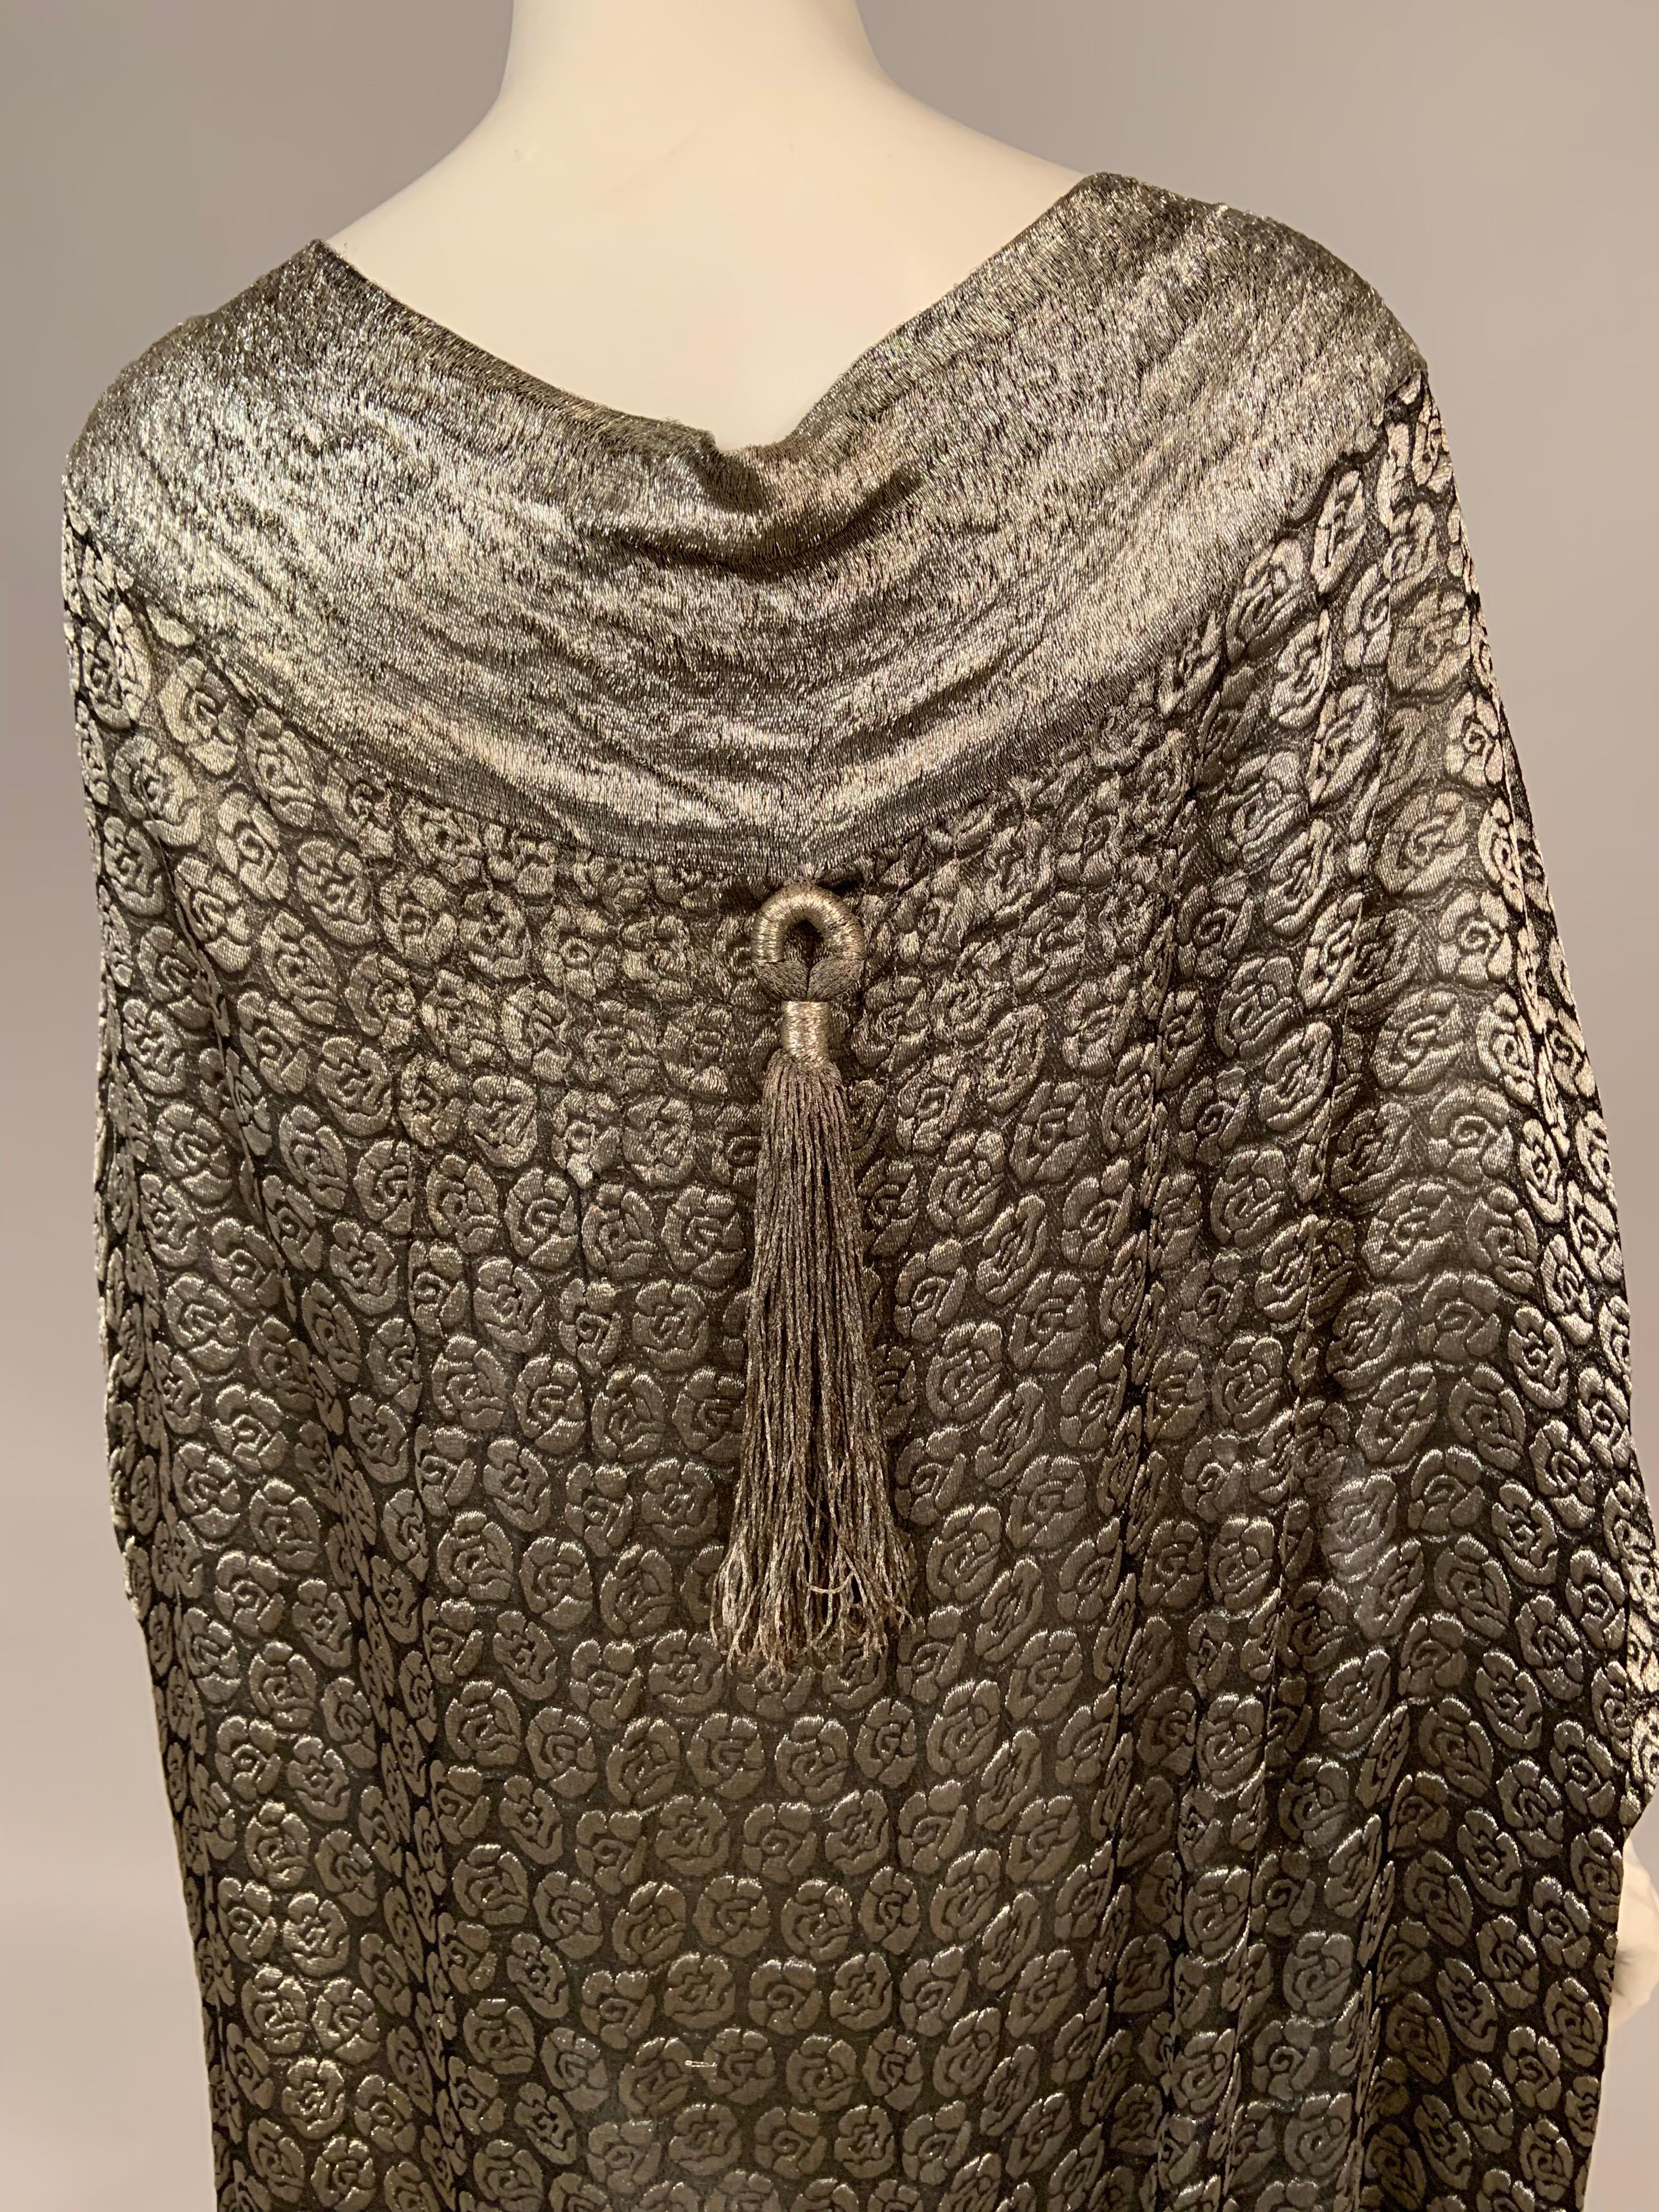 Women's Liberty Paris Black and Silver Lame Cocoon, Cape or Shawl circa 1920